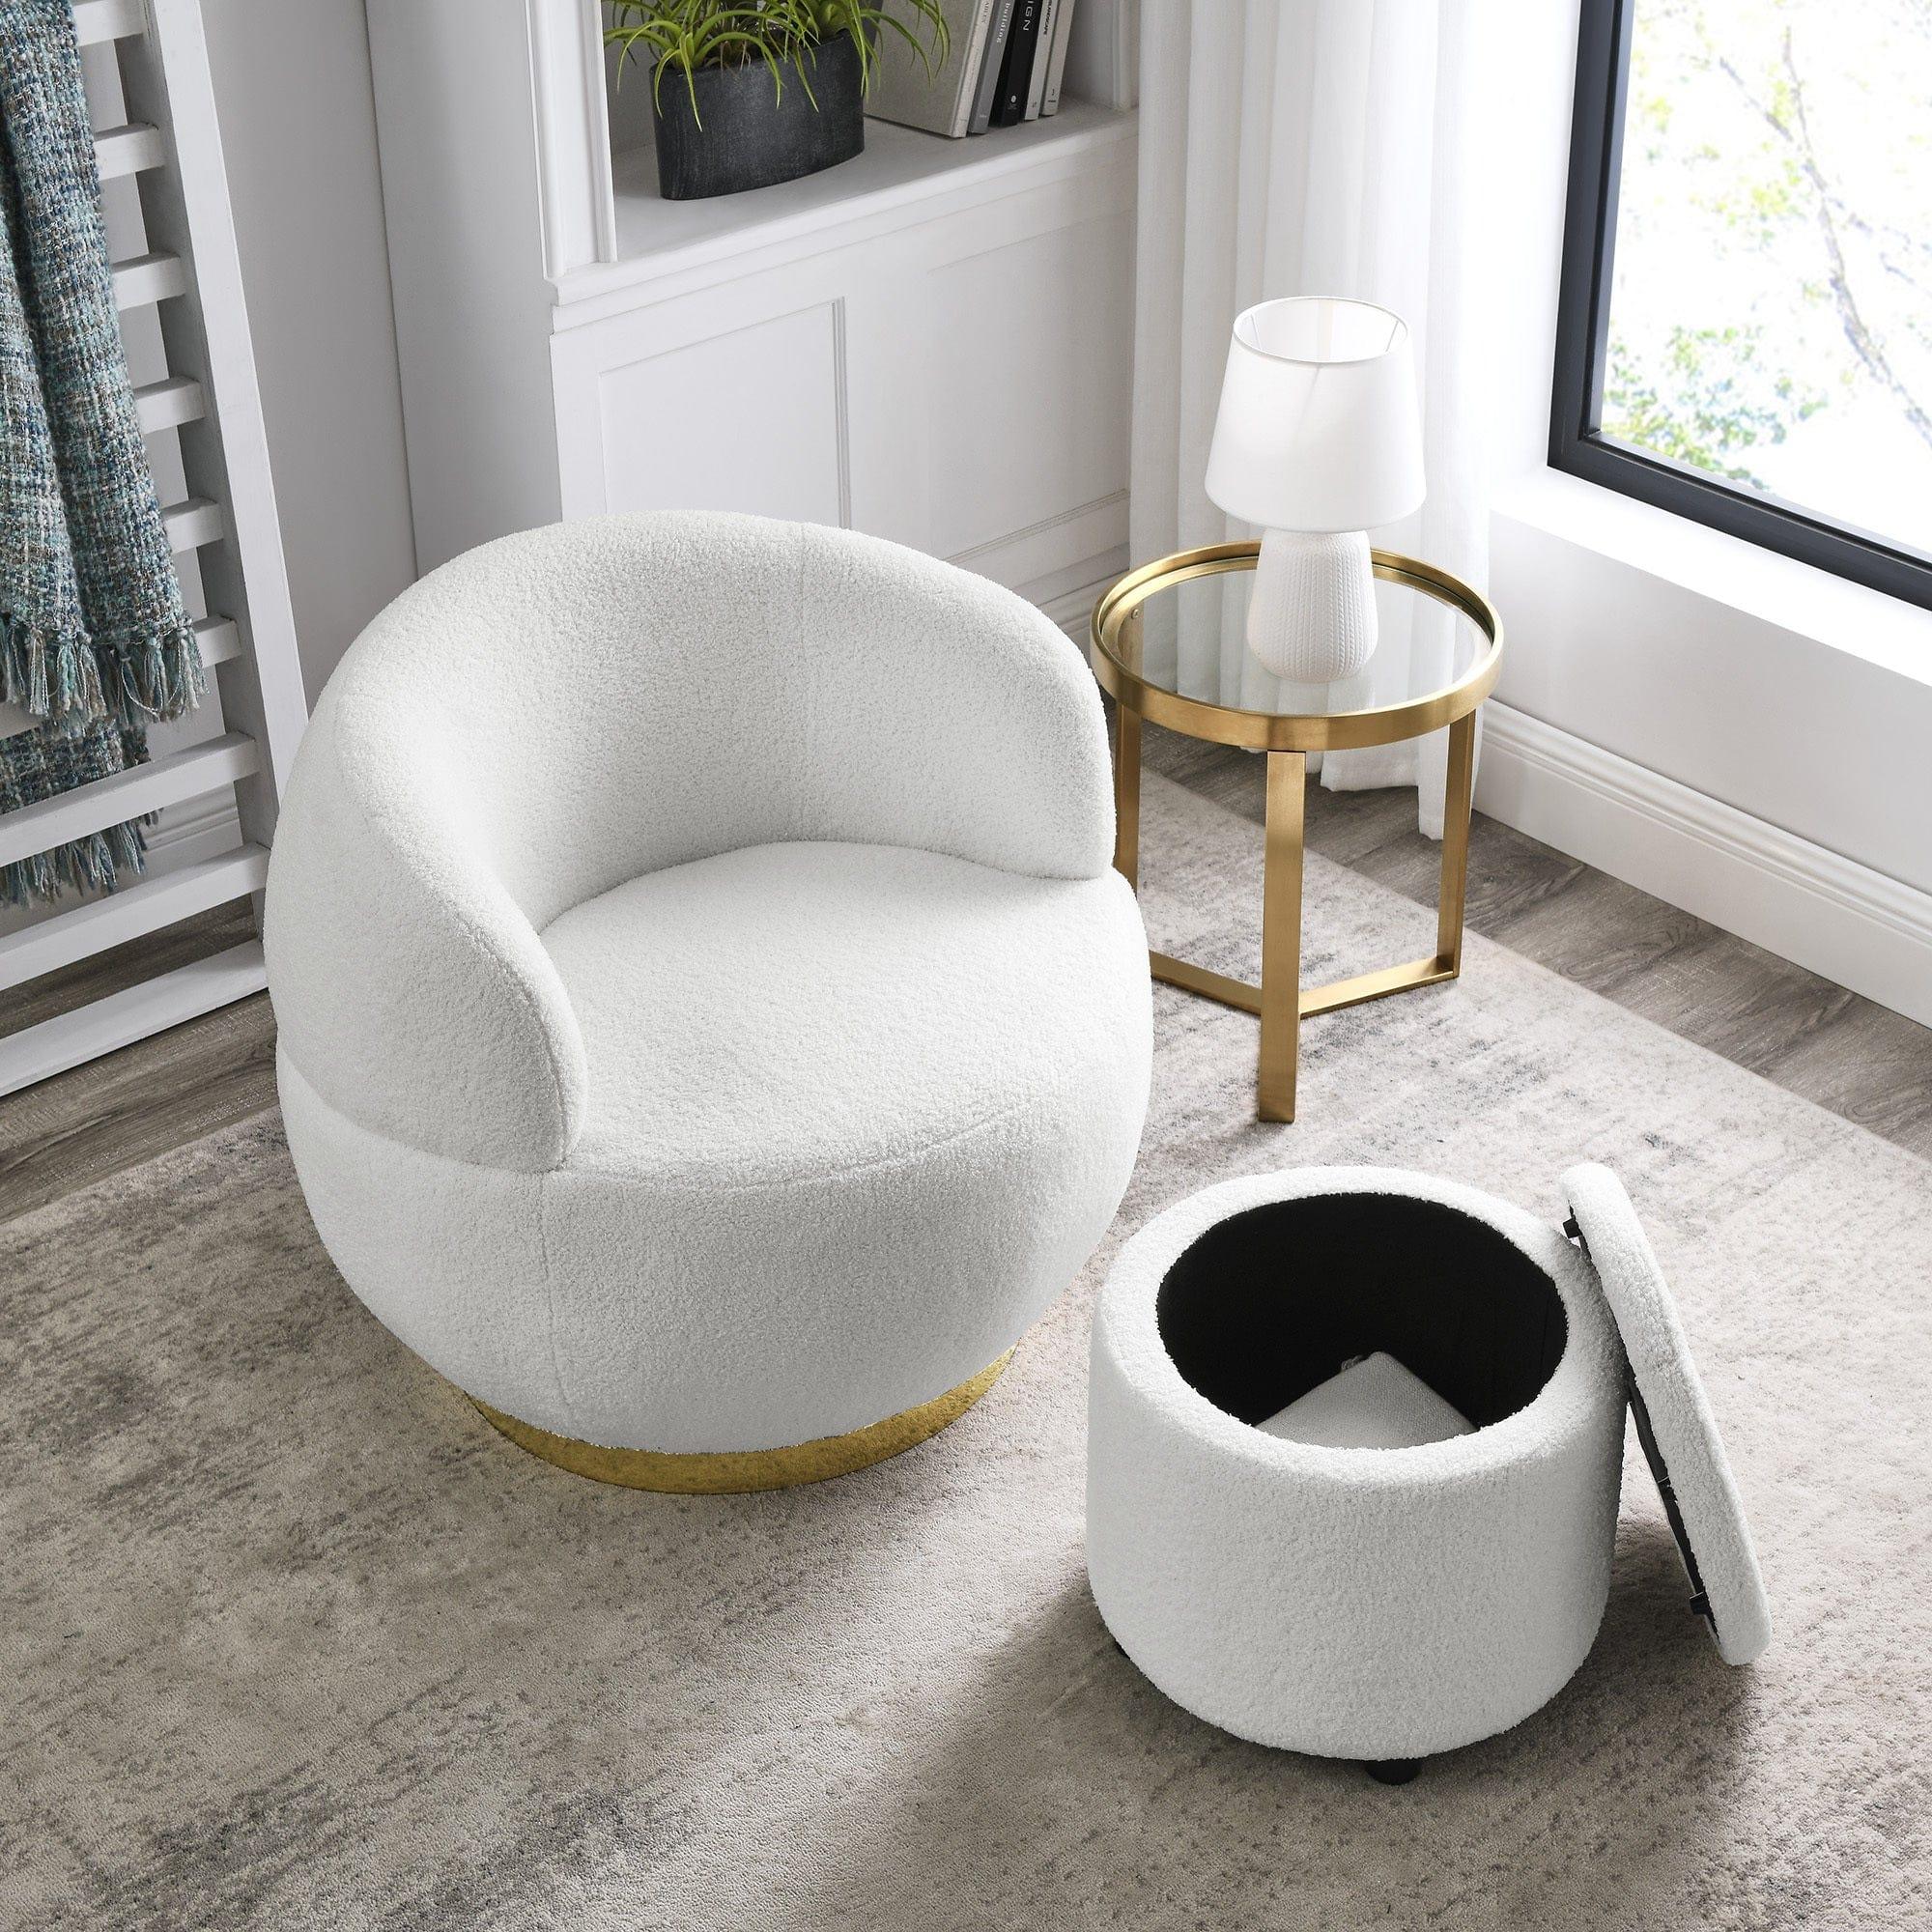 Shop Swviel Barrel Chair with Gold Stainless Steel Base, with Storage Ottoman, Teddy Fabric, Ivory Mademoiselle Home Decor